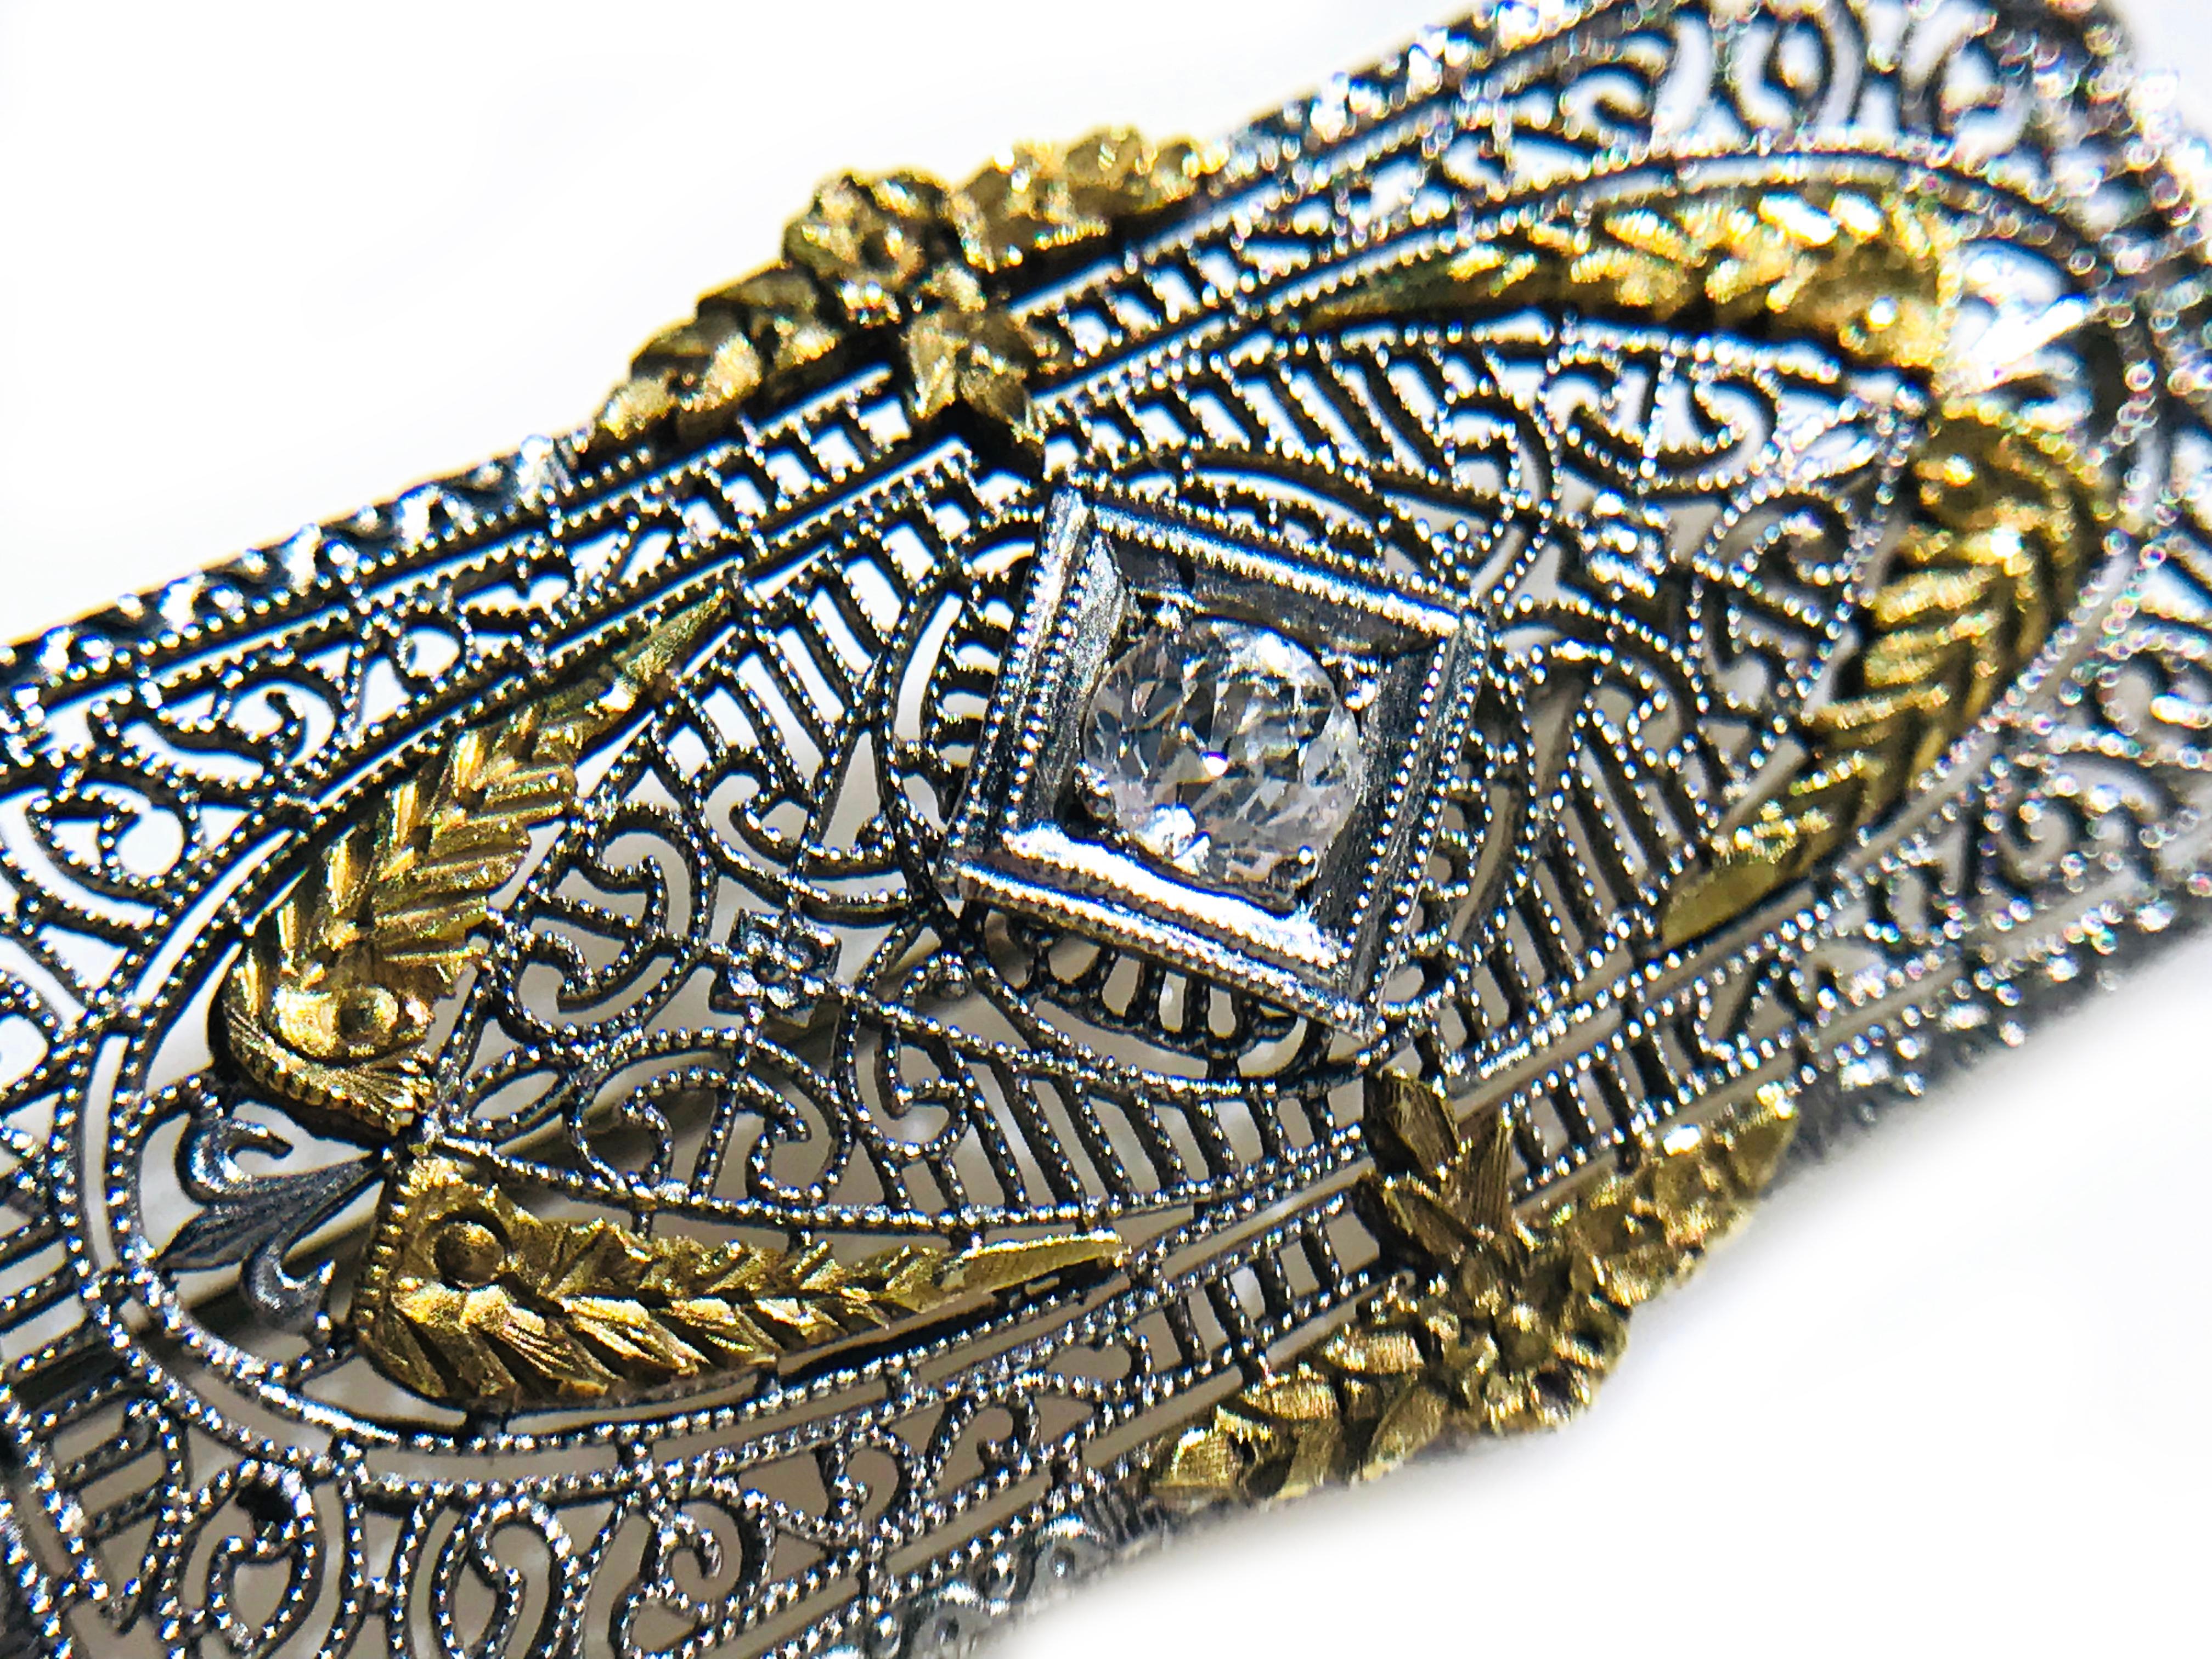 Stunning Antique Art Deco platinum and 14k white gold brooch with an intricate filigree design that is as elegant as lace and provides the perfect setting for the featured old European-cut 3.4mm diamond. Diamond has an approximate weight of 0.15